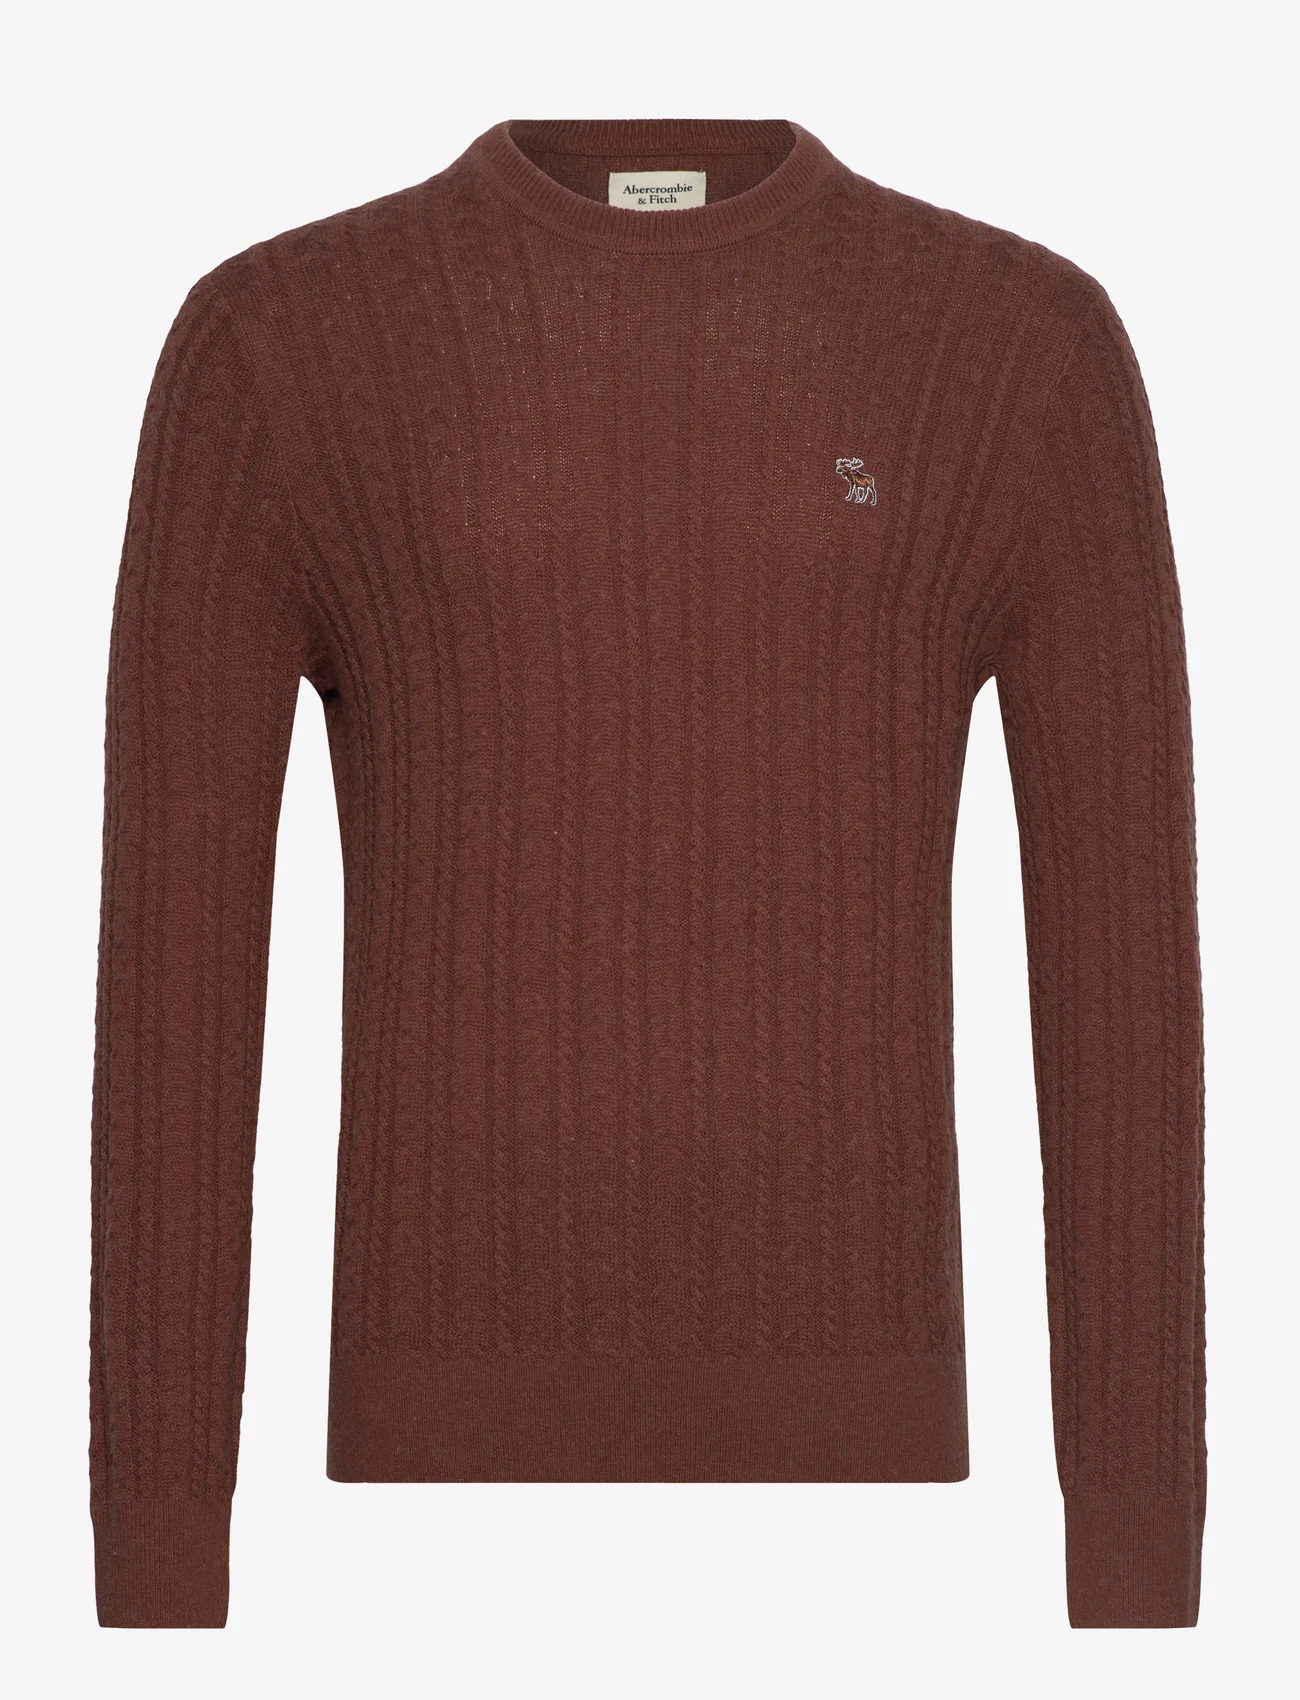 Abercrombie & Fitch - ANF MENS SWEATERS - rund hals - friar brown - 0